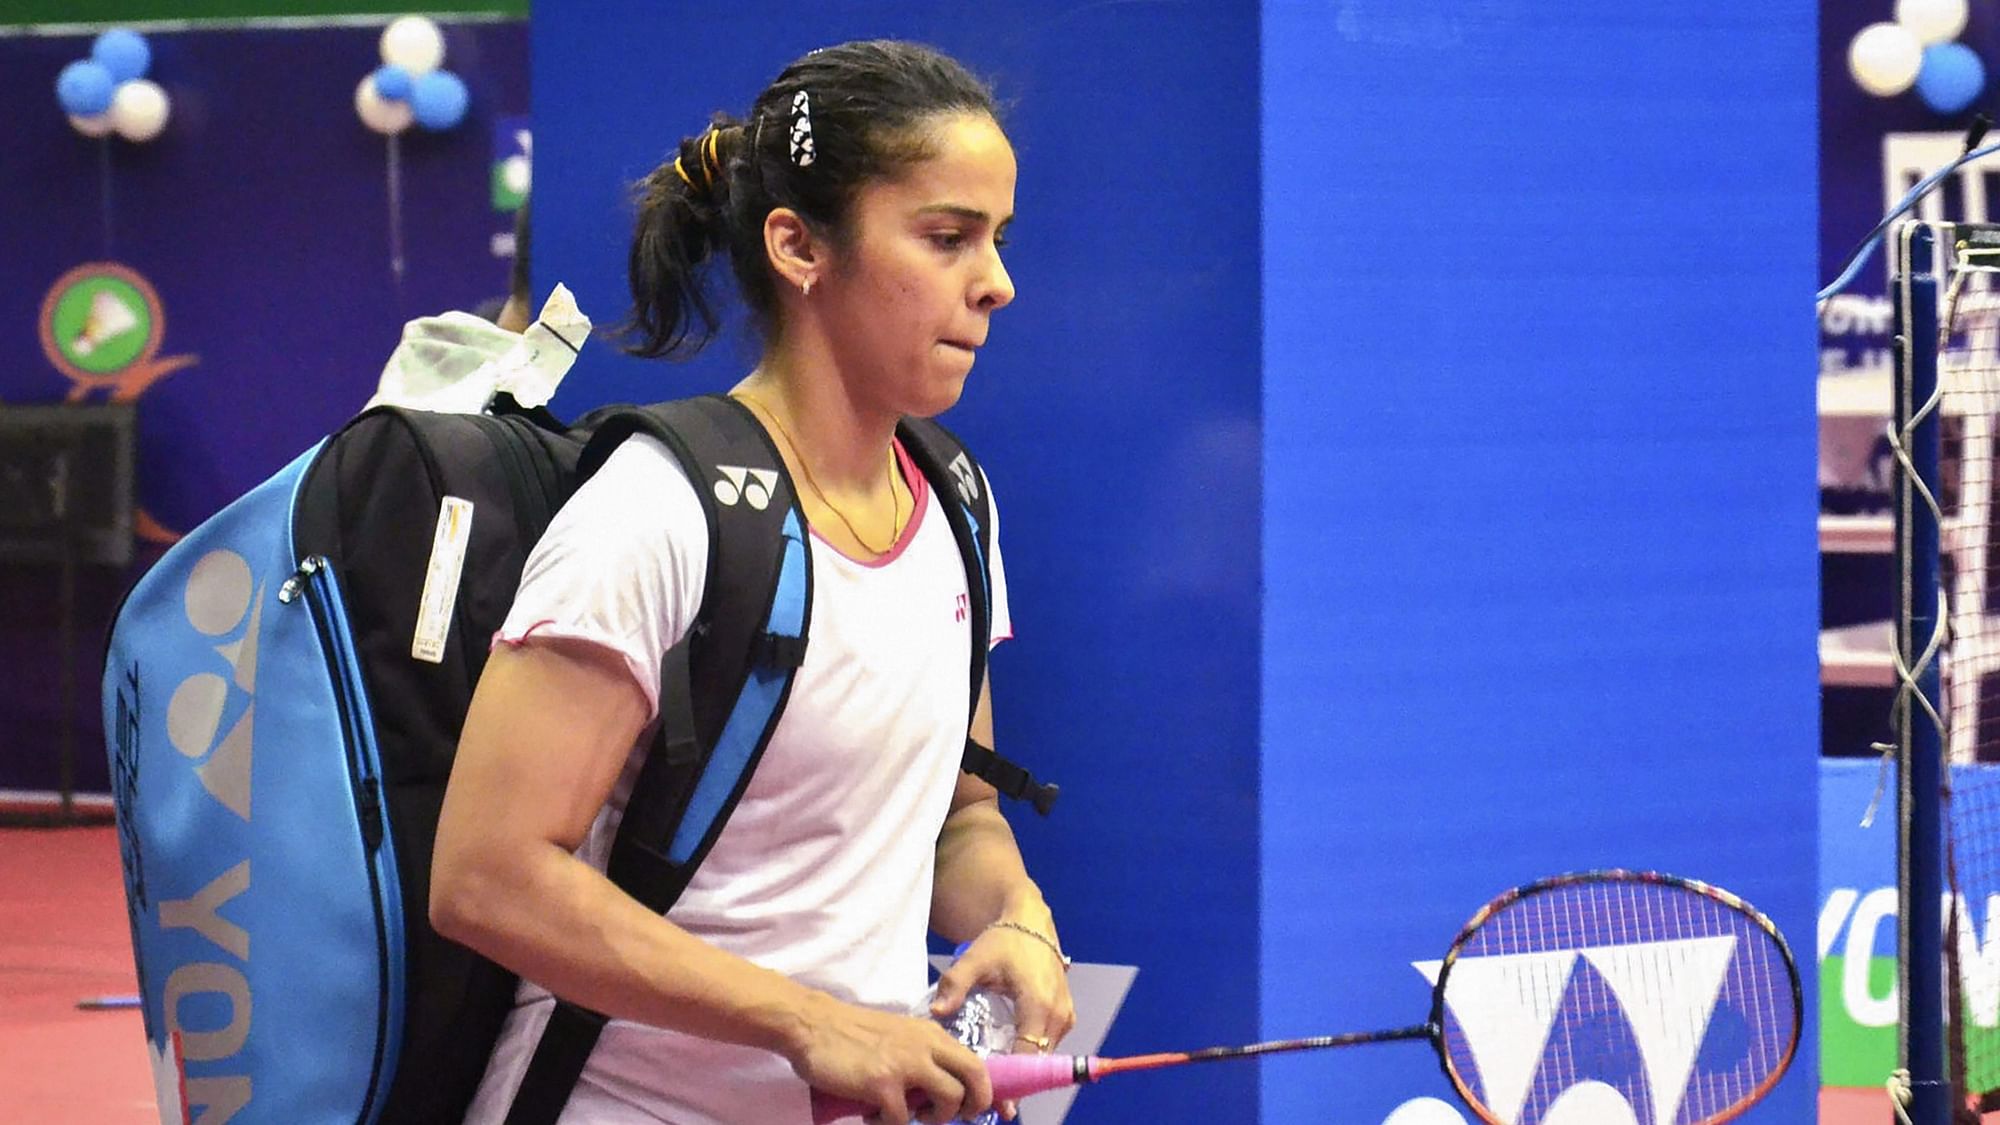 Saina Nehwal has been knocked out in the opening round of the Hong Kong Open.